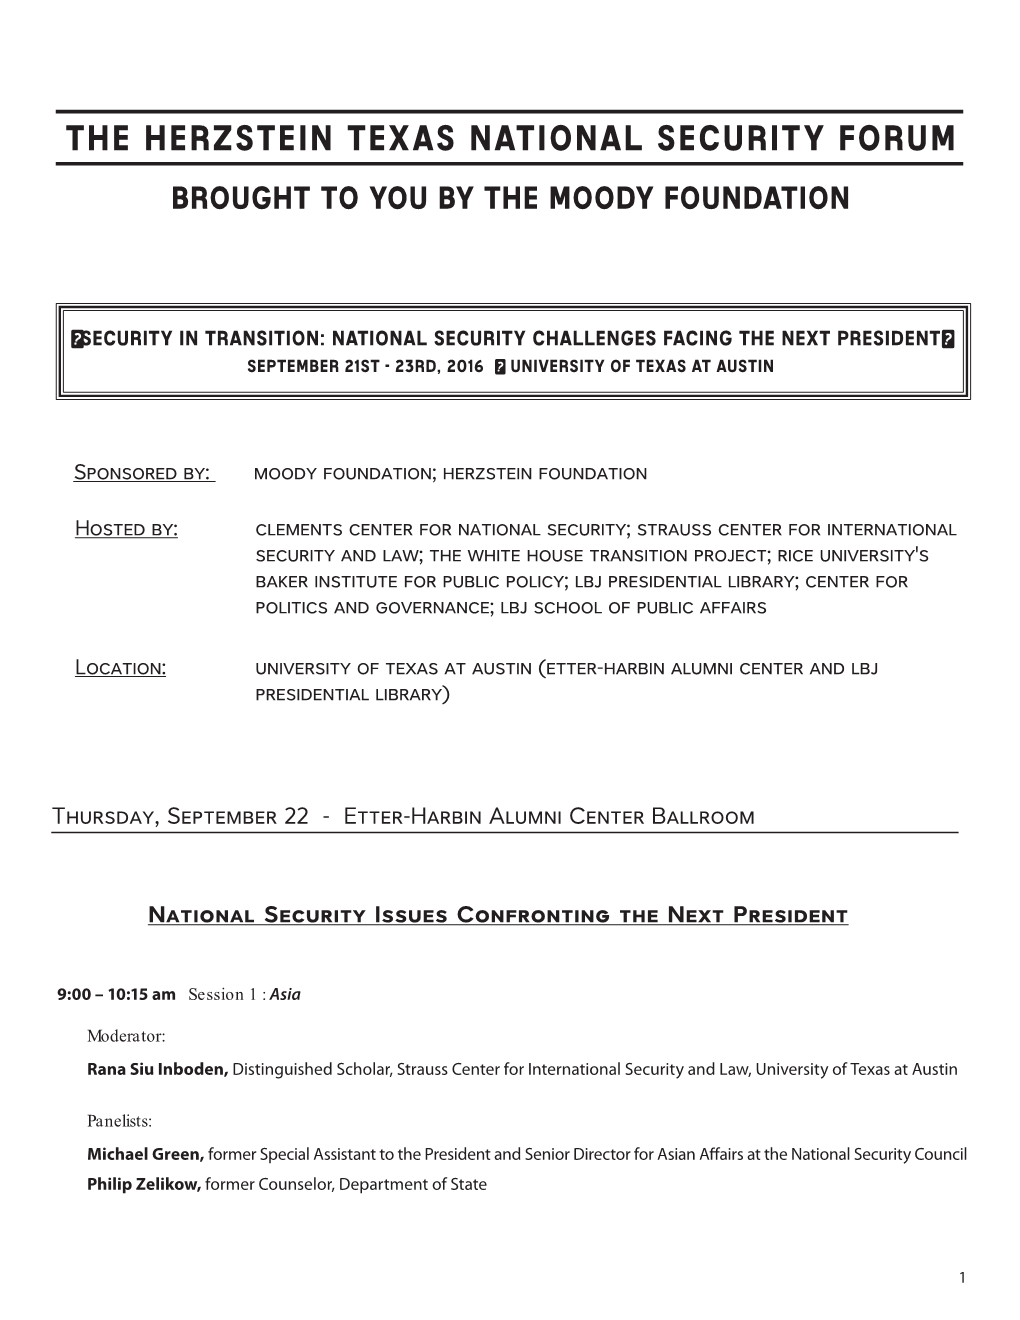 The Herzstein Texas National Security Forum Brought to You by the Moody Foundation